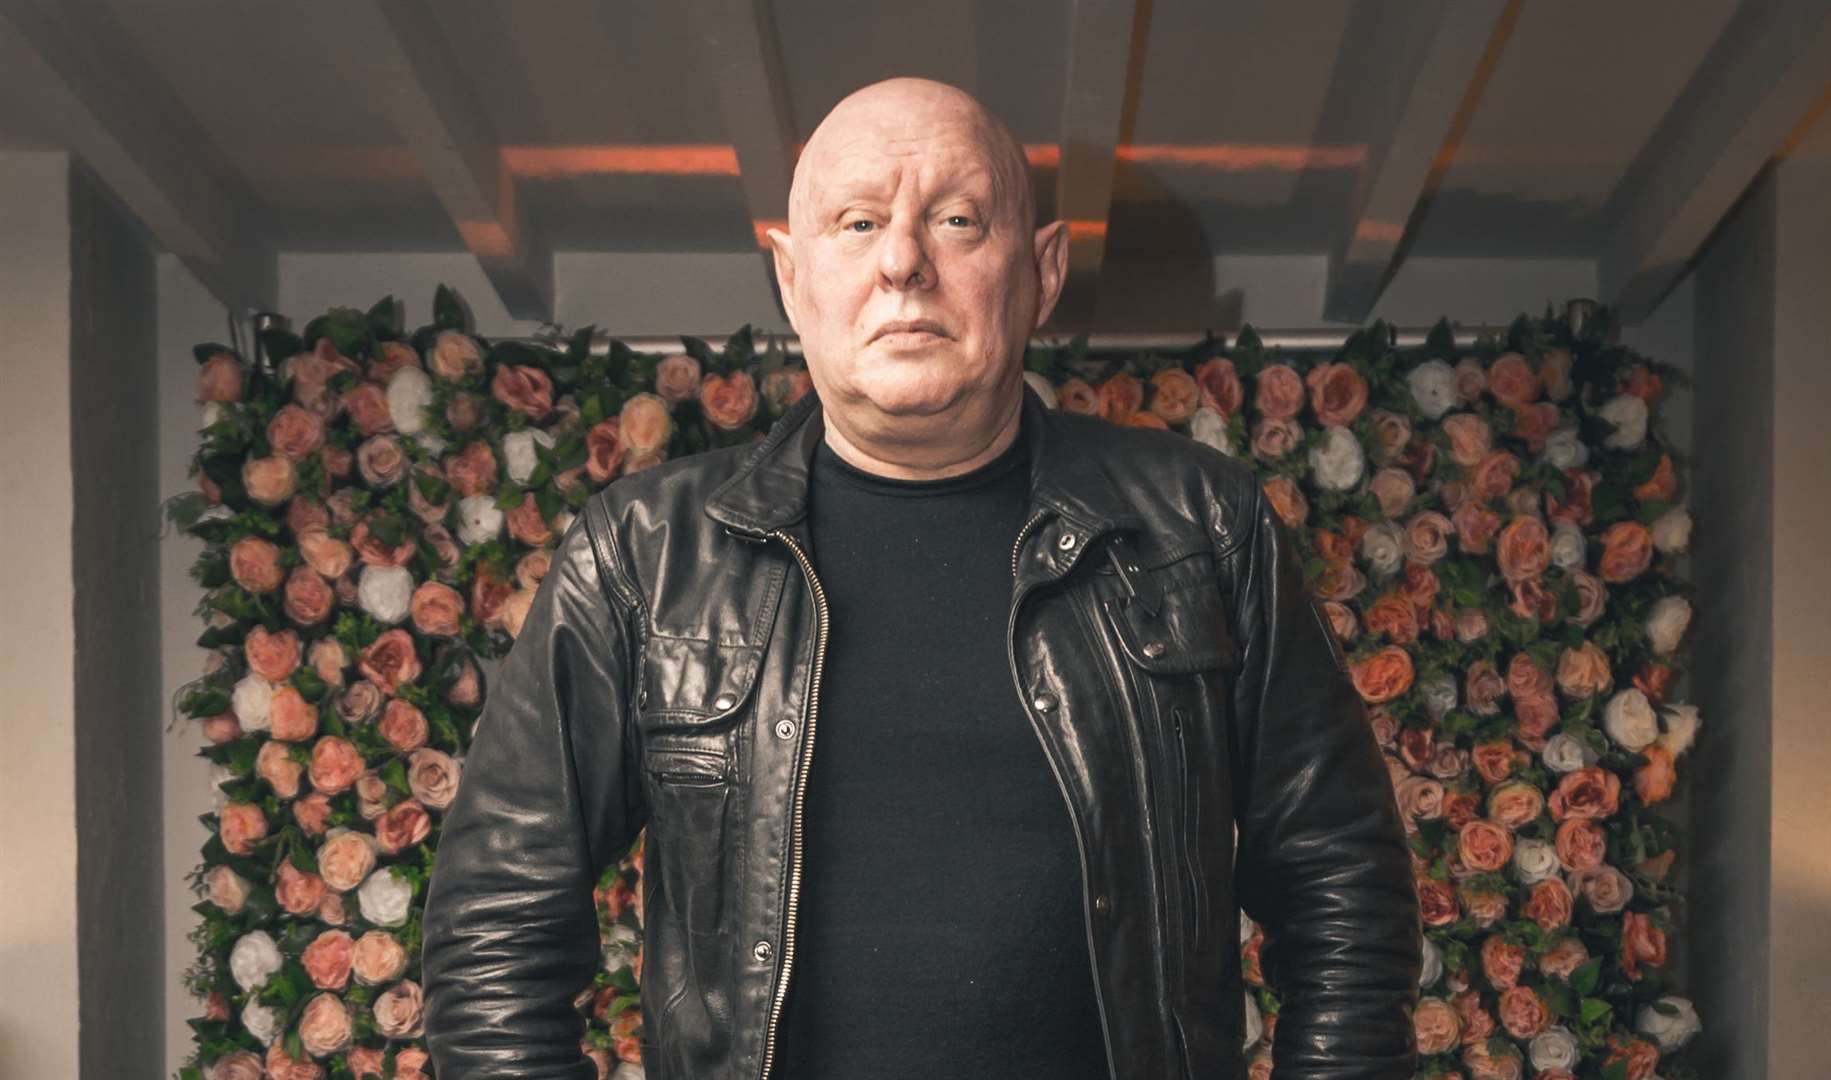 Shaun Ryder of the Happy Mondays will be in Maidstone Picture: Paul Husband